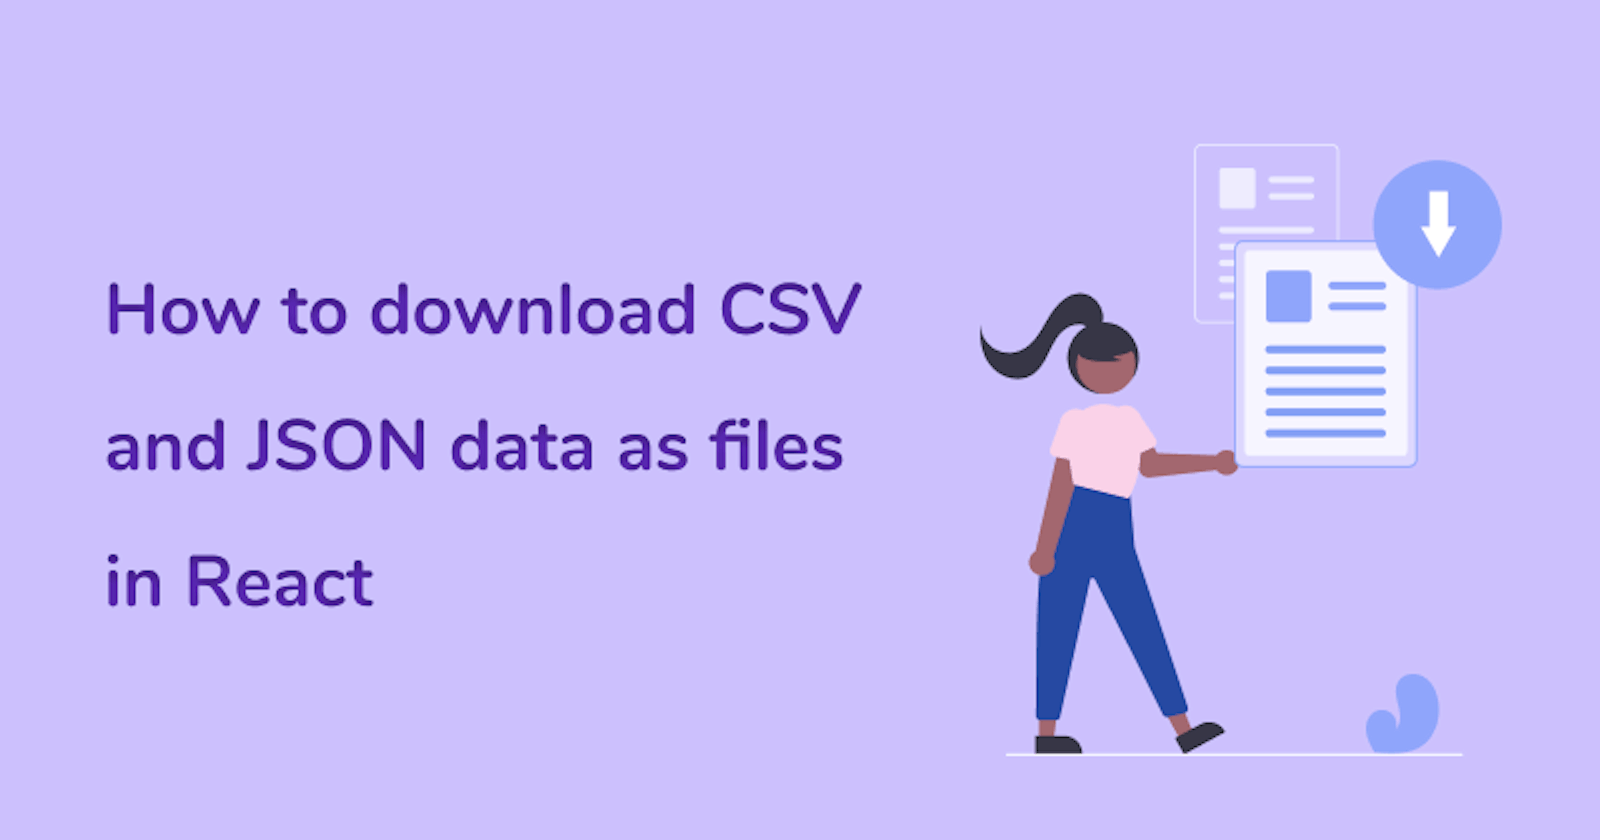 How to download CSV and JSON files in React